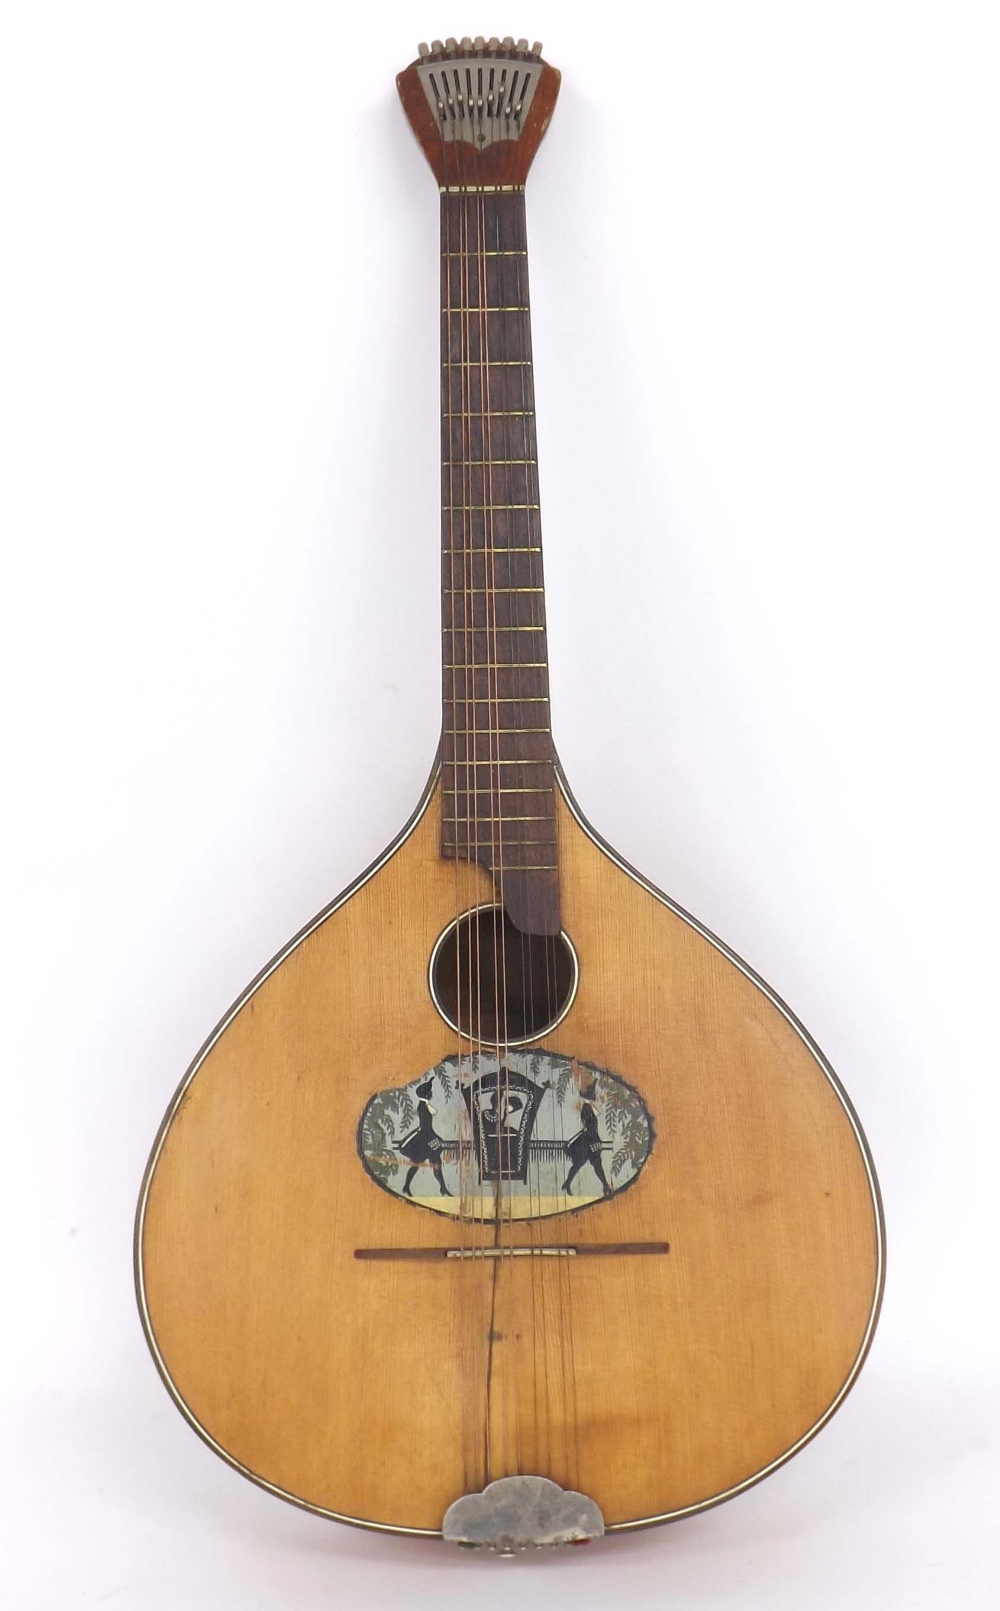 Early 20th century nine string German made waldzither of the cittern family, soft bag